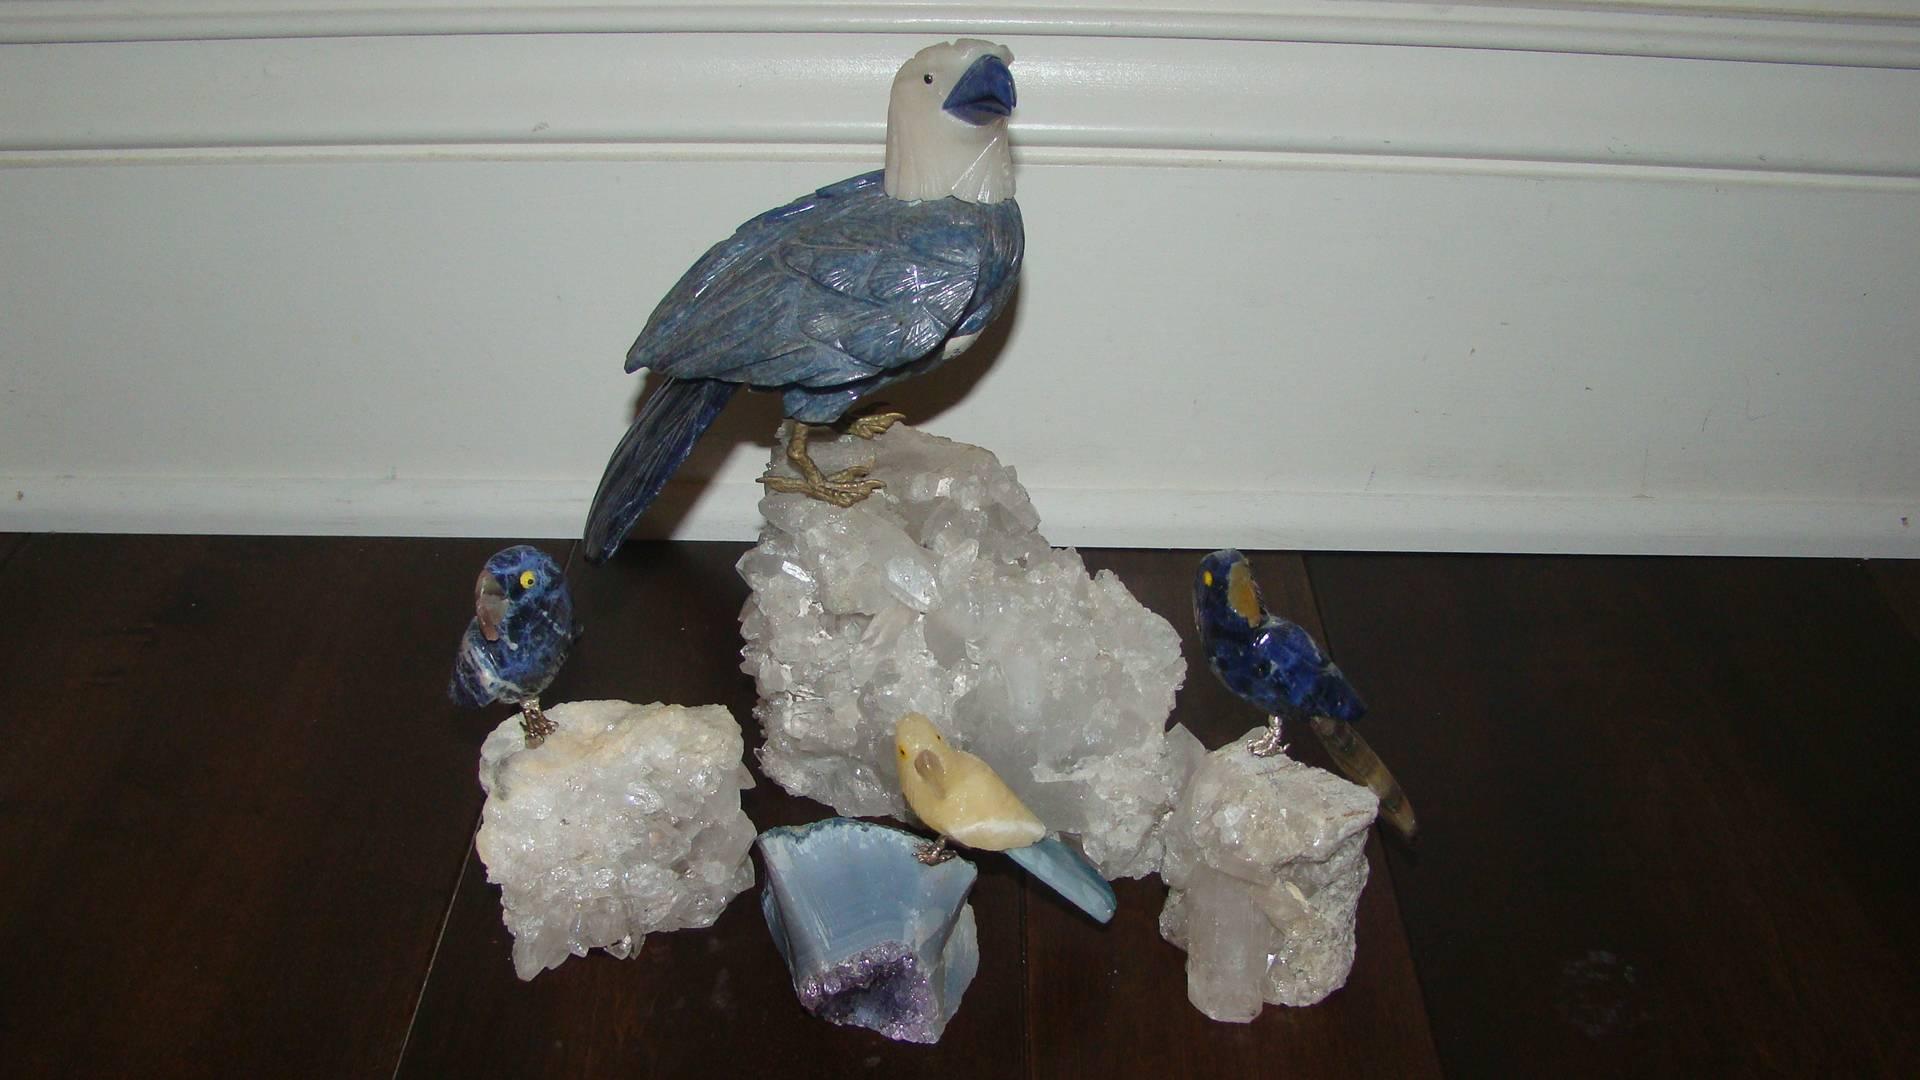 Great set of four quartz crystal and gemstone bird sculptures. Each are finely handcrafted of different gemstones with brass feet and quartz crystal bases. Very unique sculptures in person. Price is for the set of four.